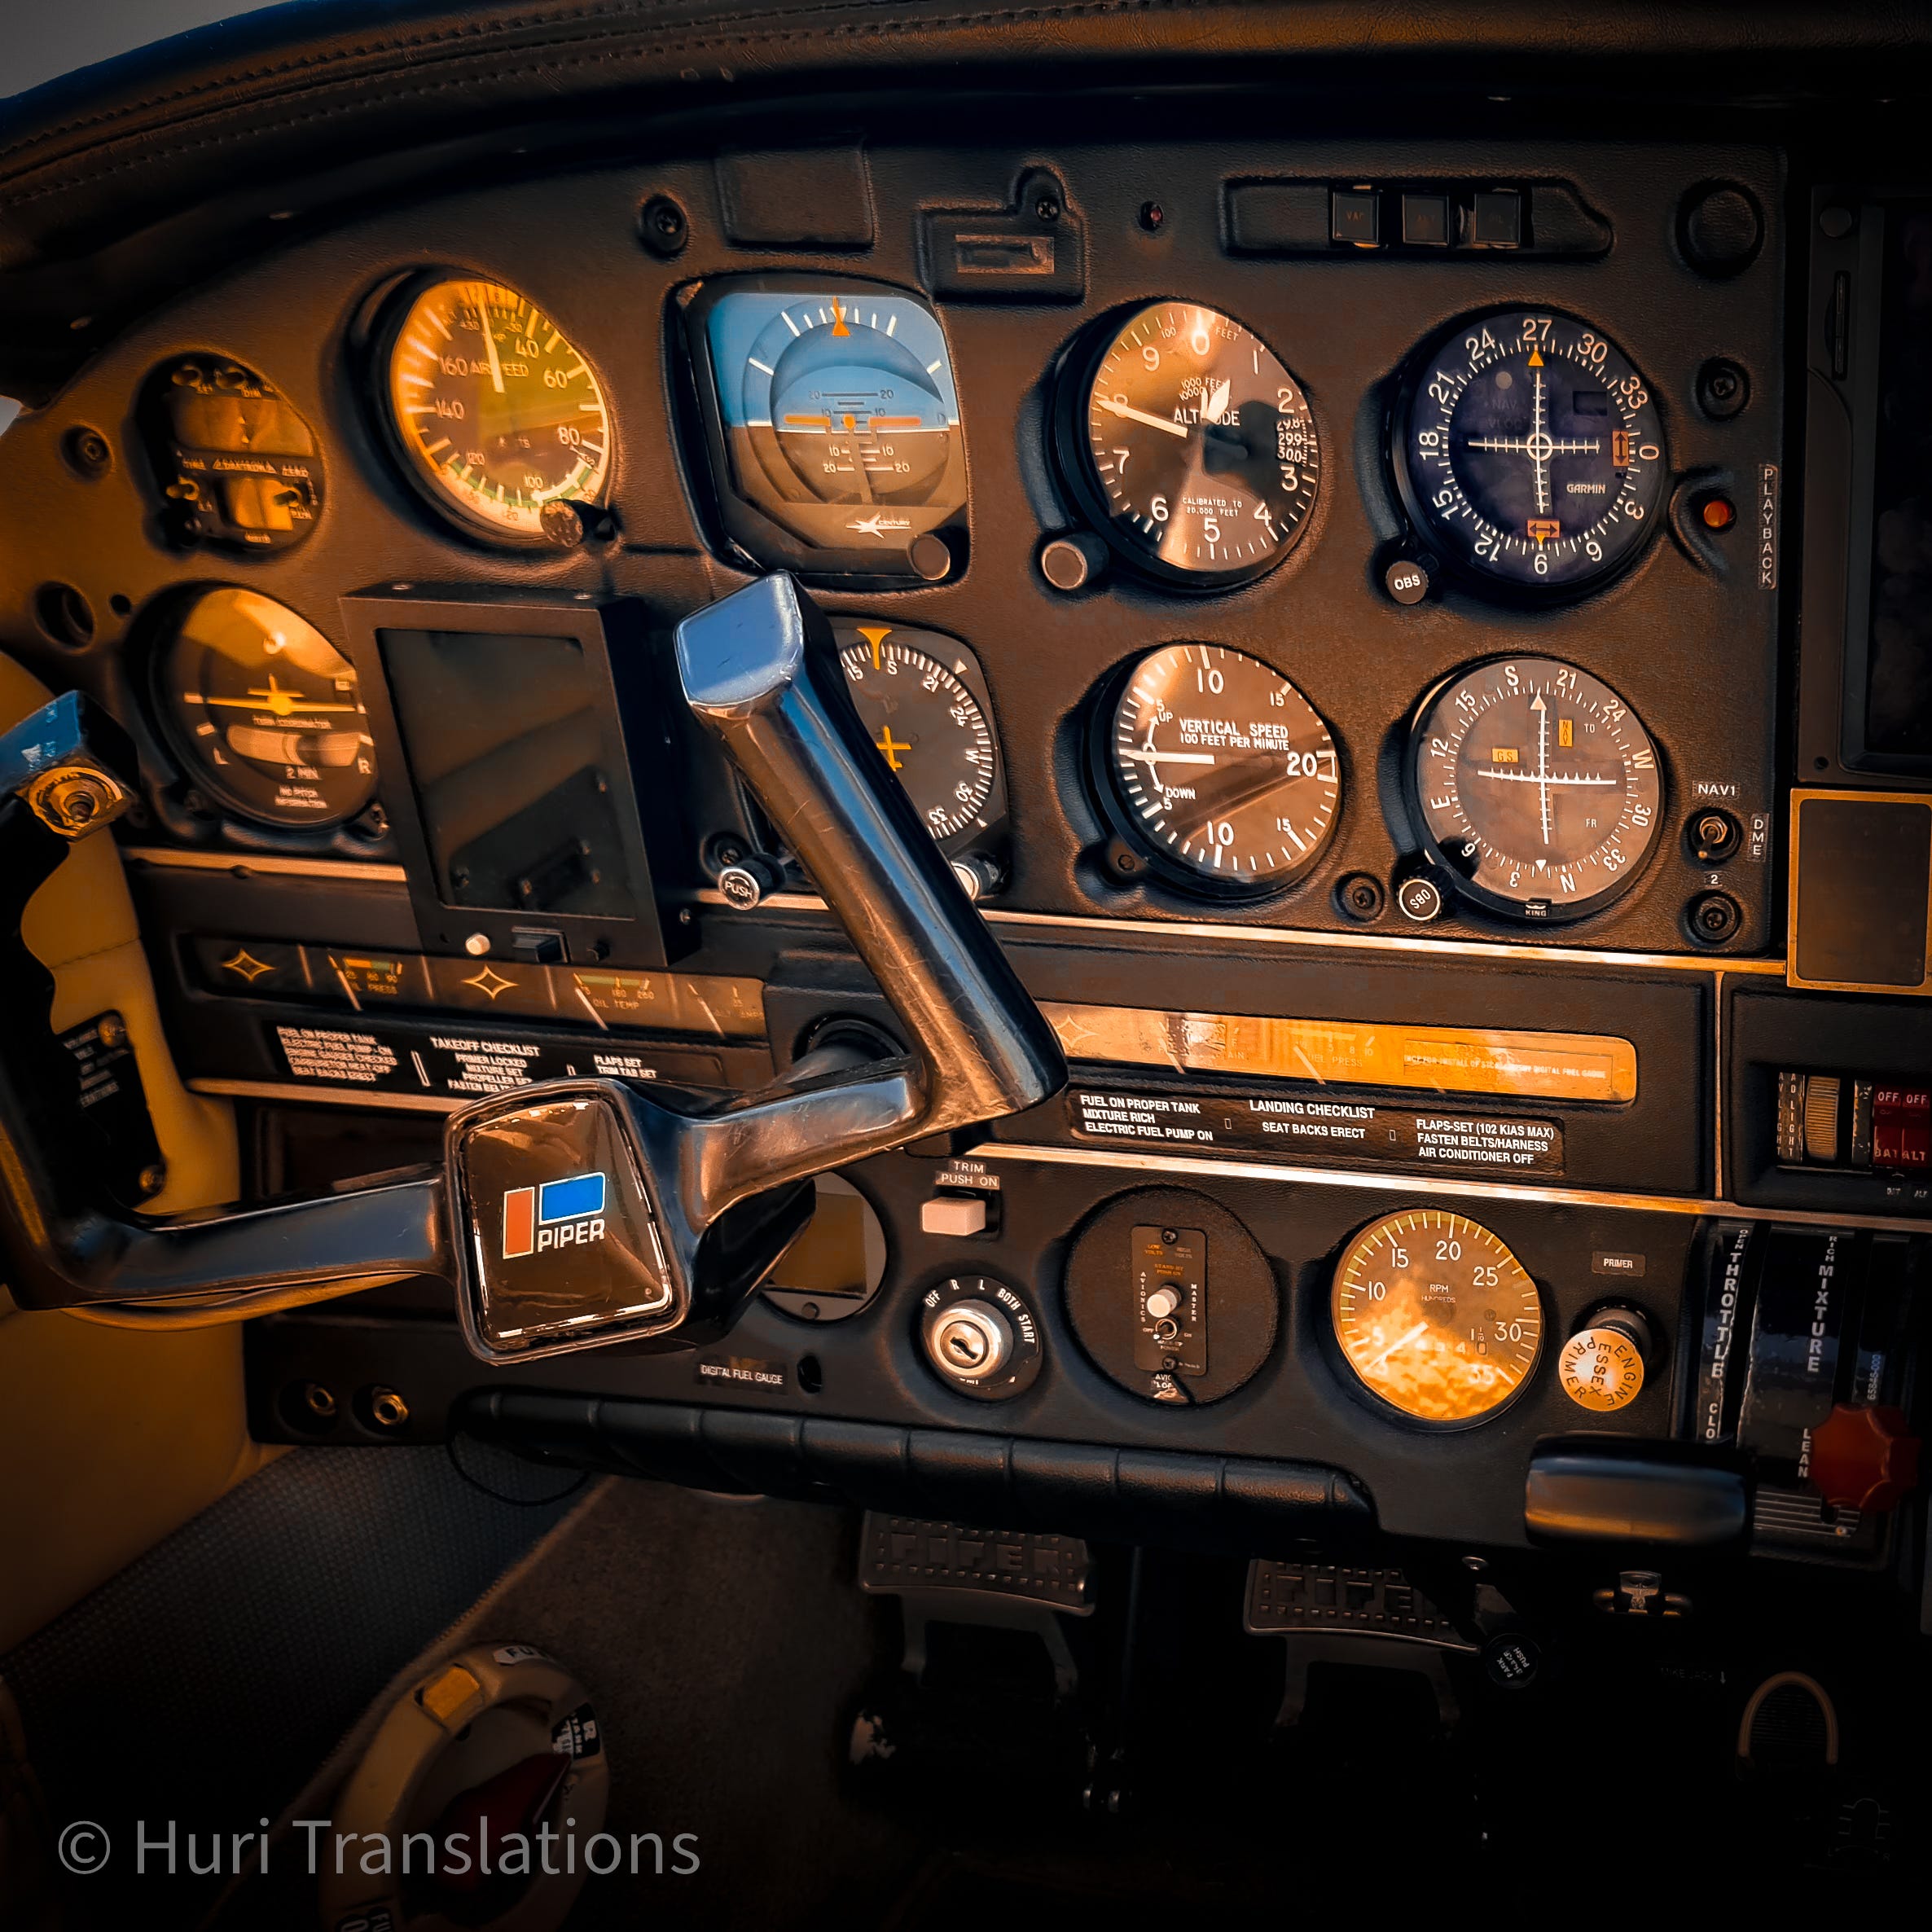 Lost in Transmission: The Linguistic Challenges Threatening Aviation S